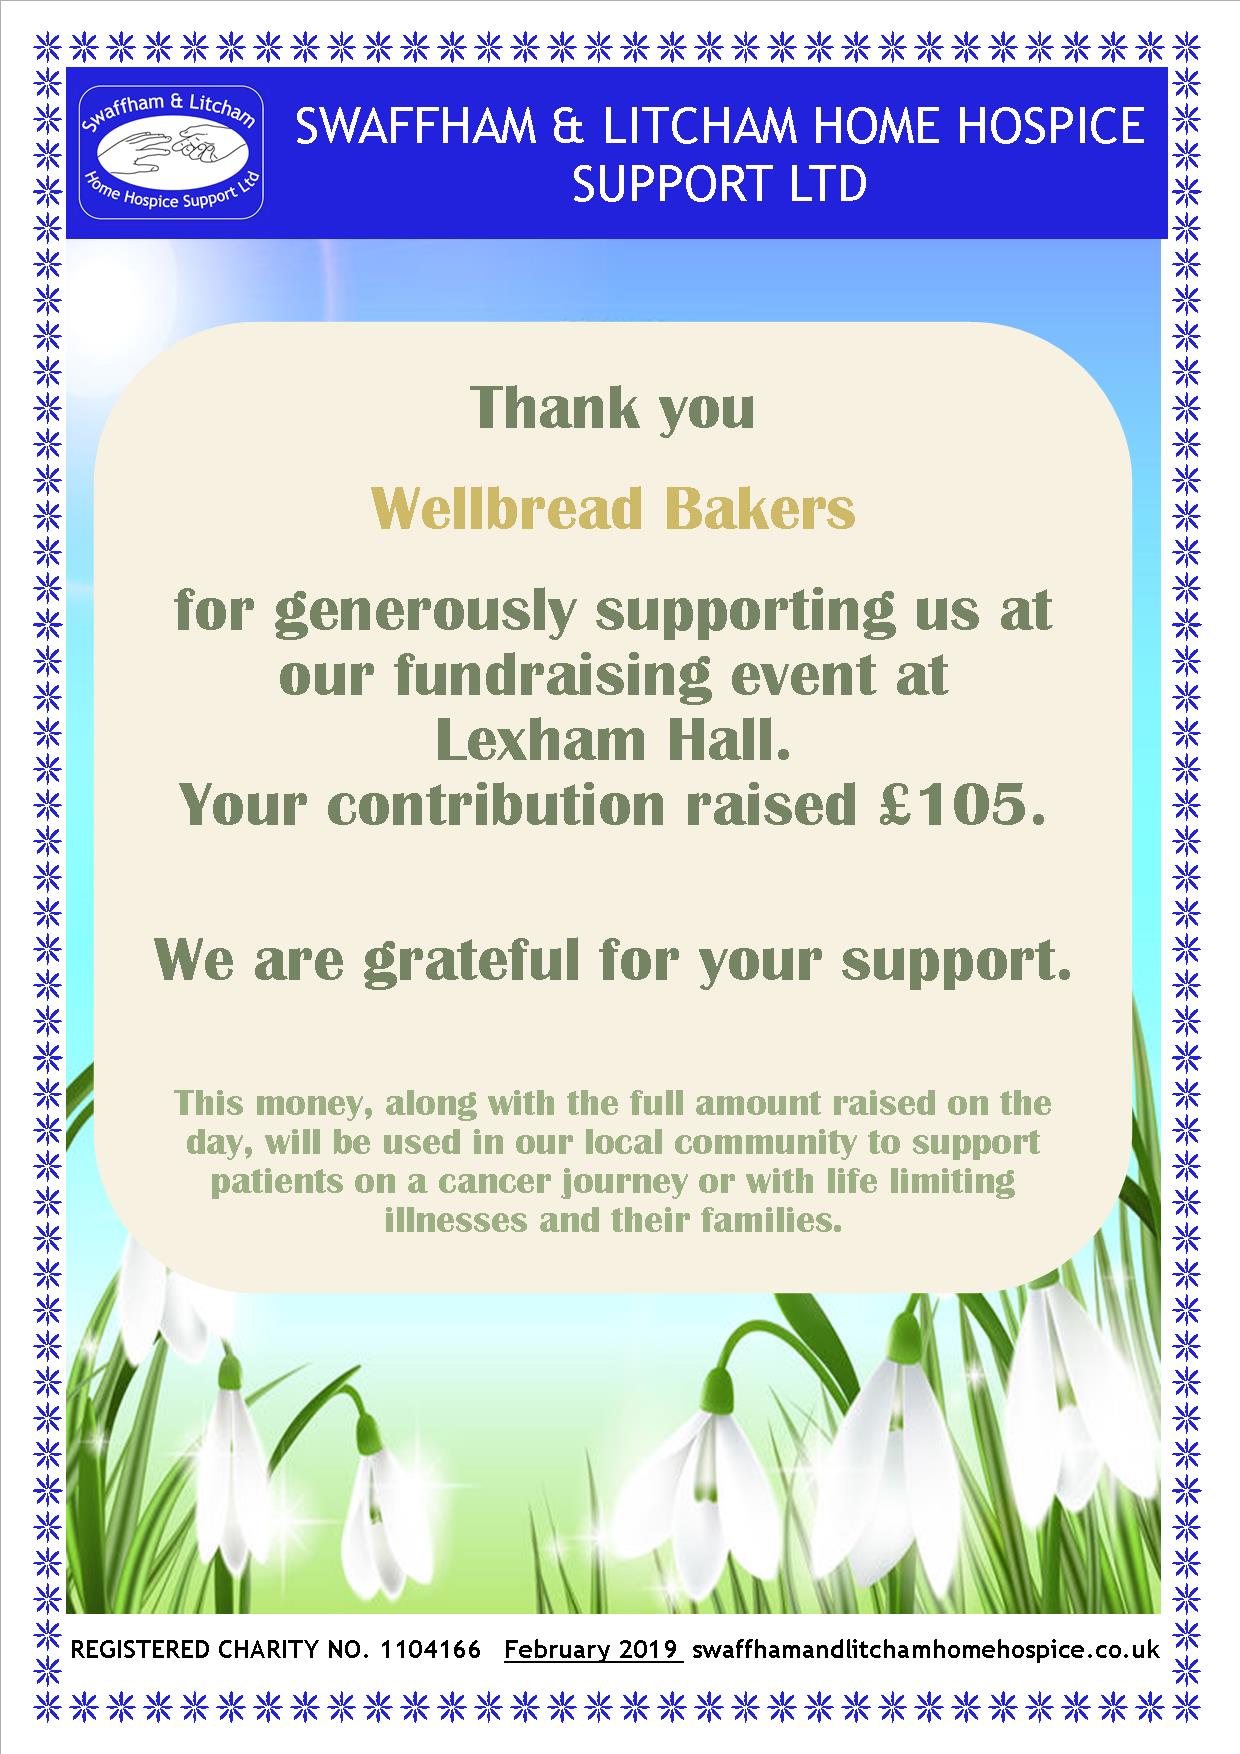 Thank you for supporting our Snowdrop Walk fundraising event at Lexham Hall, February 2019